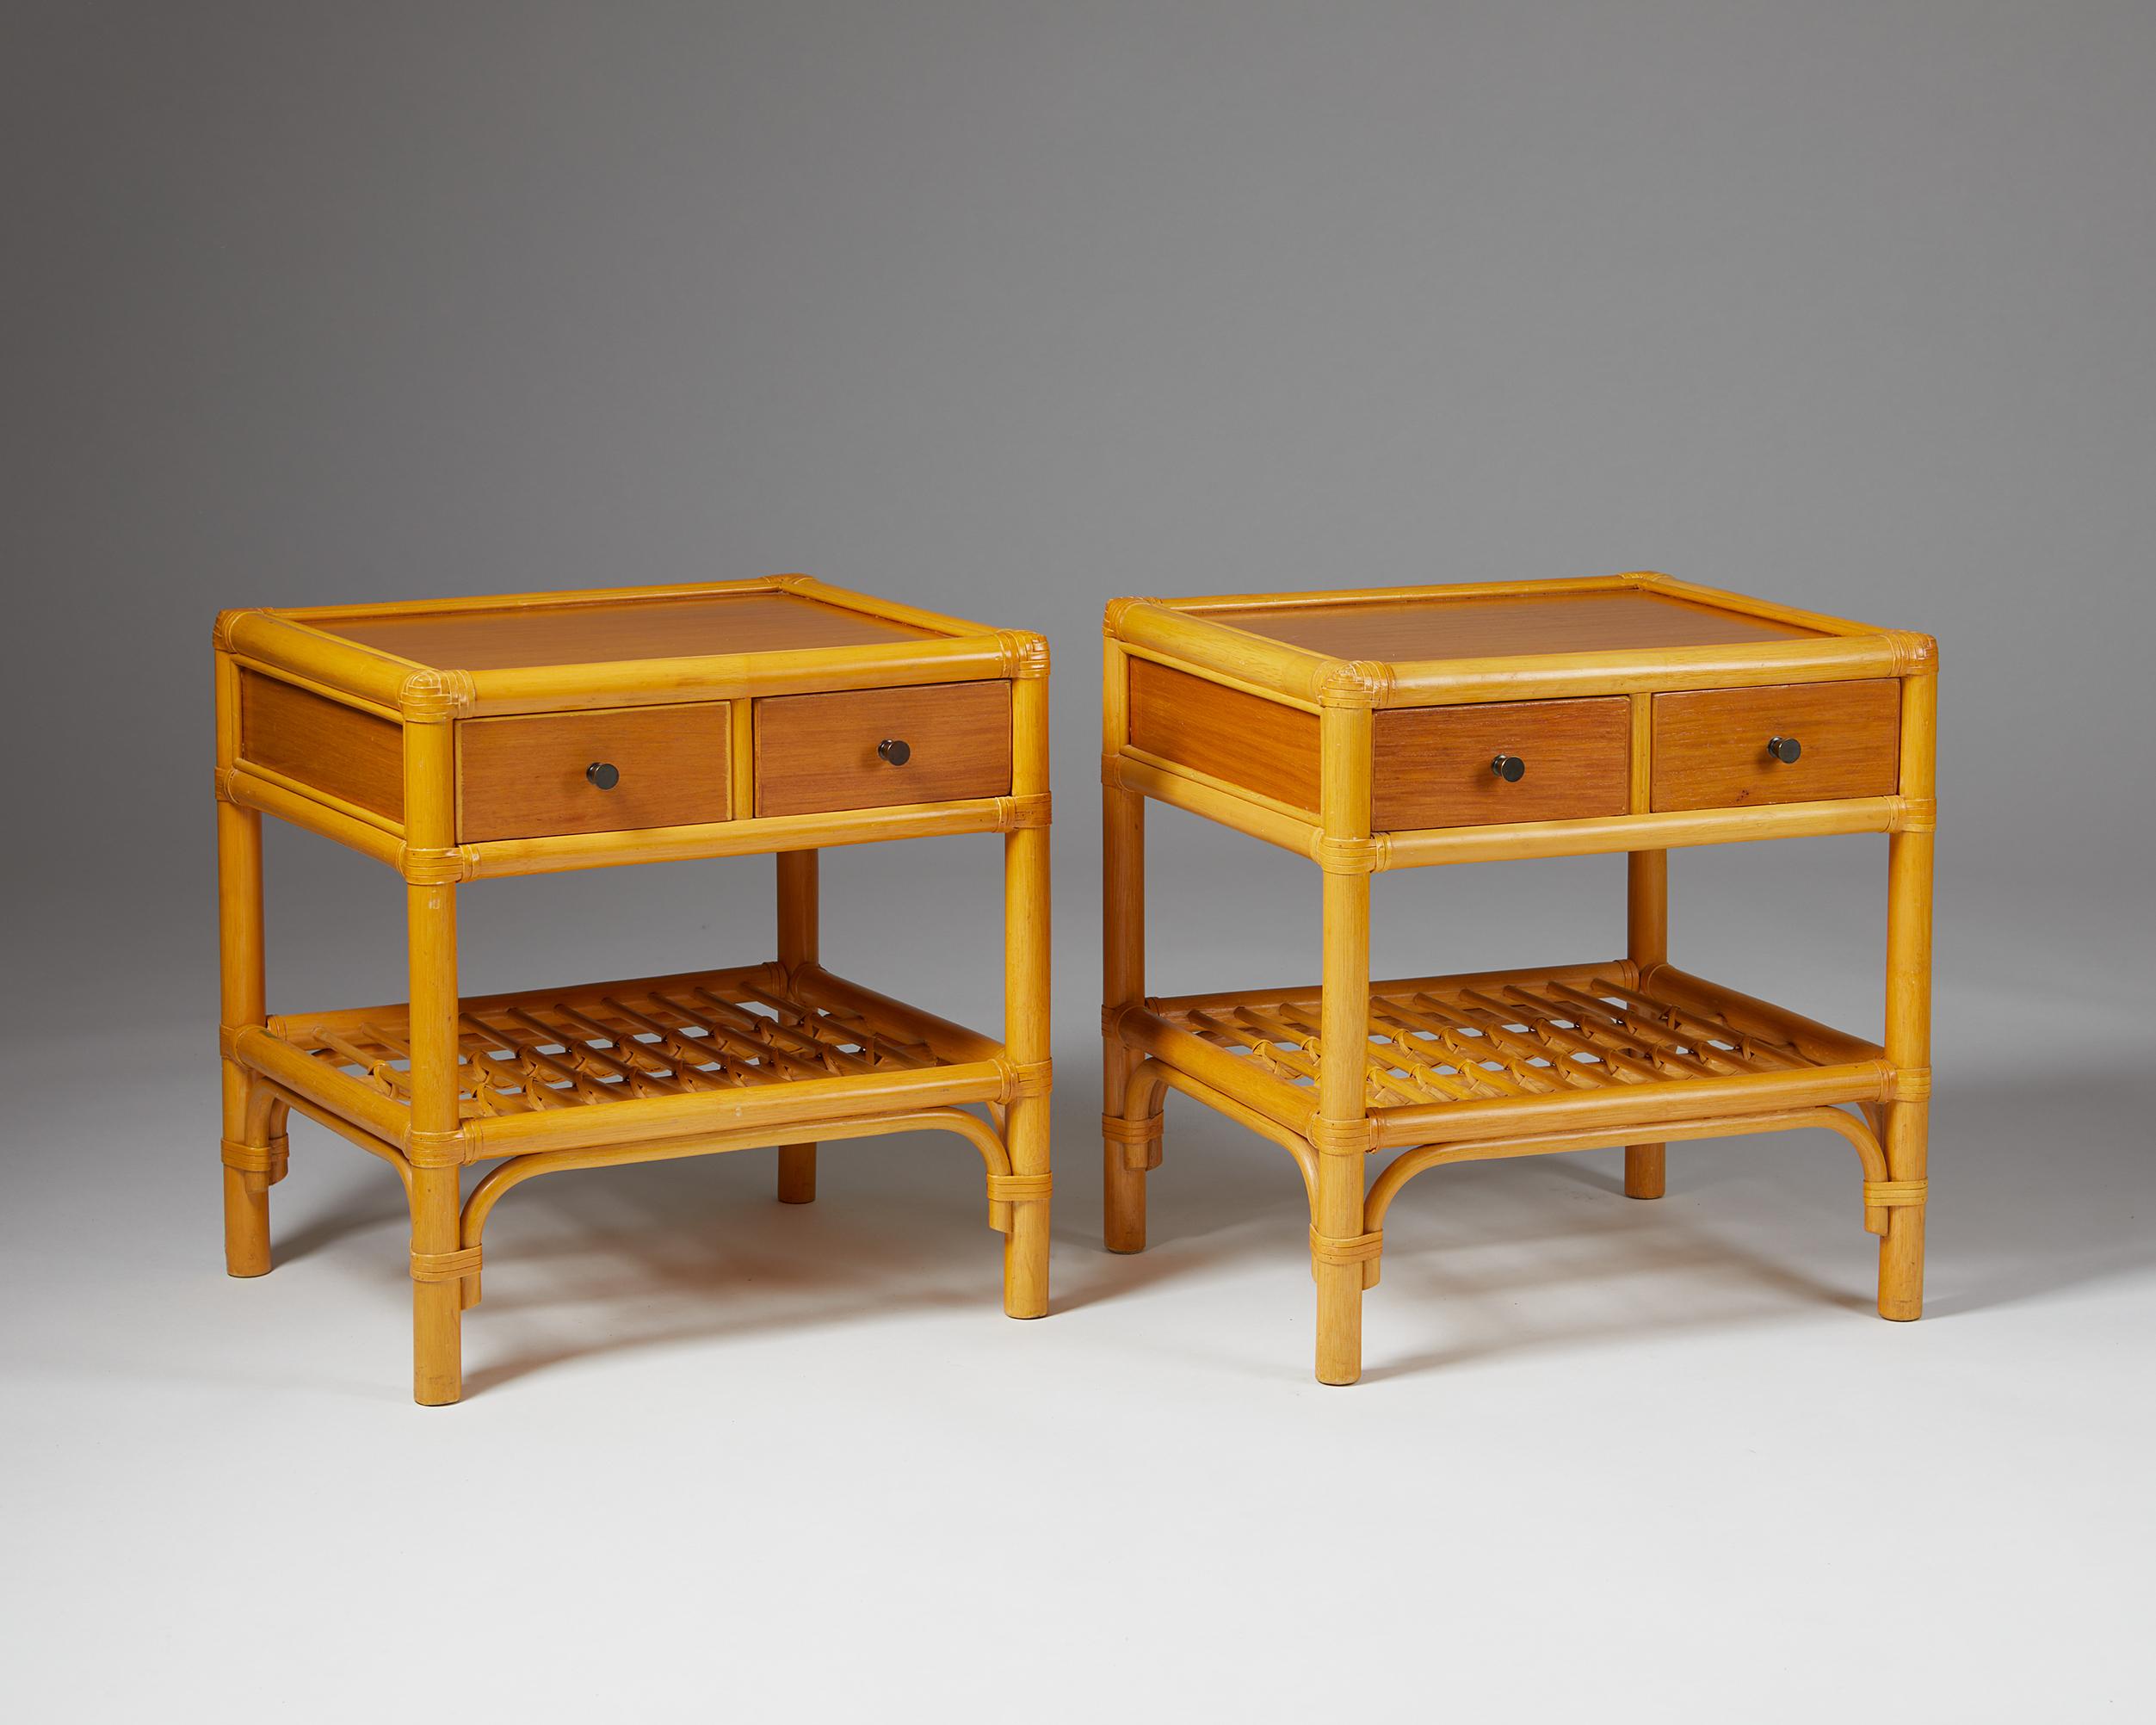 Pair of bedside tables, anonymous for DUX,
Sweden. 1960s.

Cane, rattan and teak.

The colonial-style combination of cane, rattan, and teak makes this Scandinavian bedside table design particularly interesting. The woven edges and metal handles